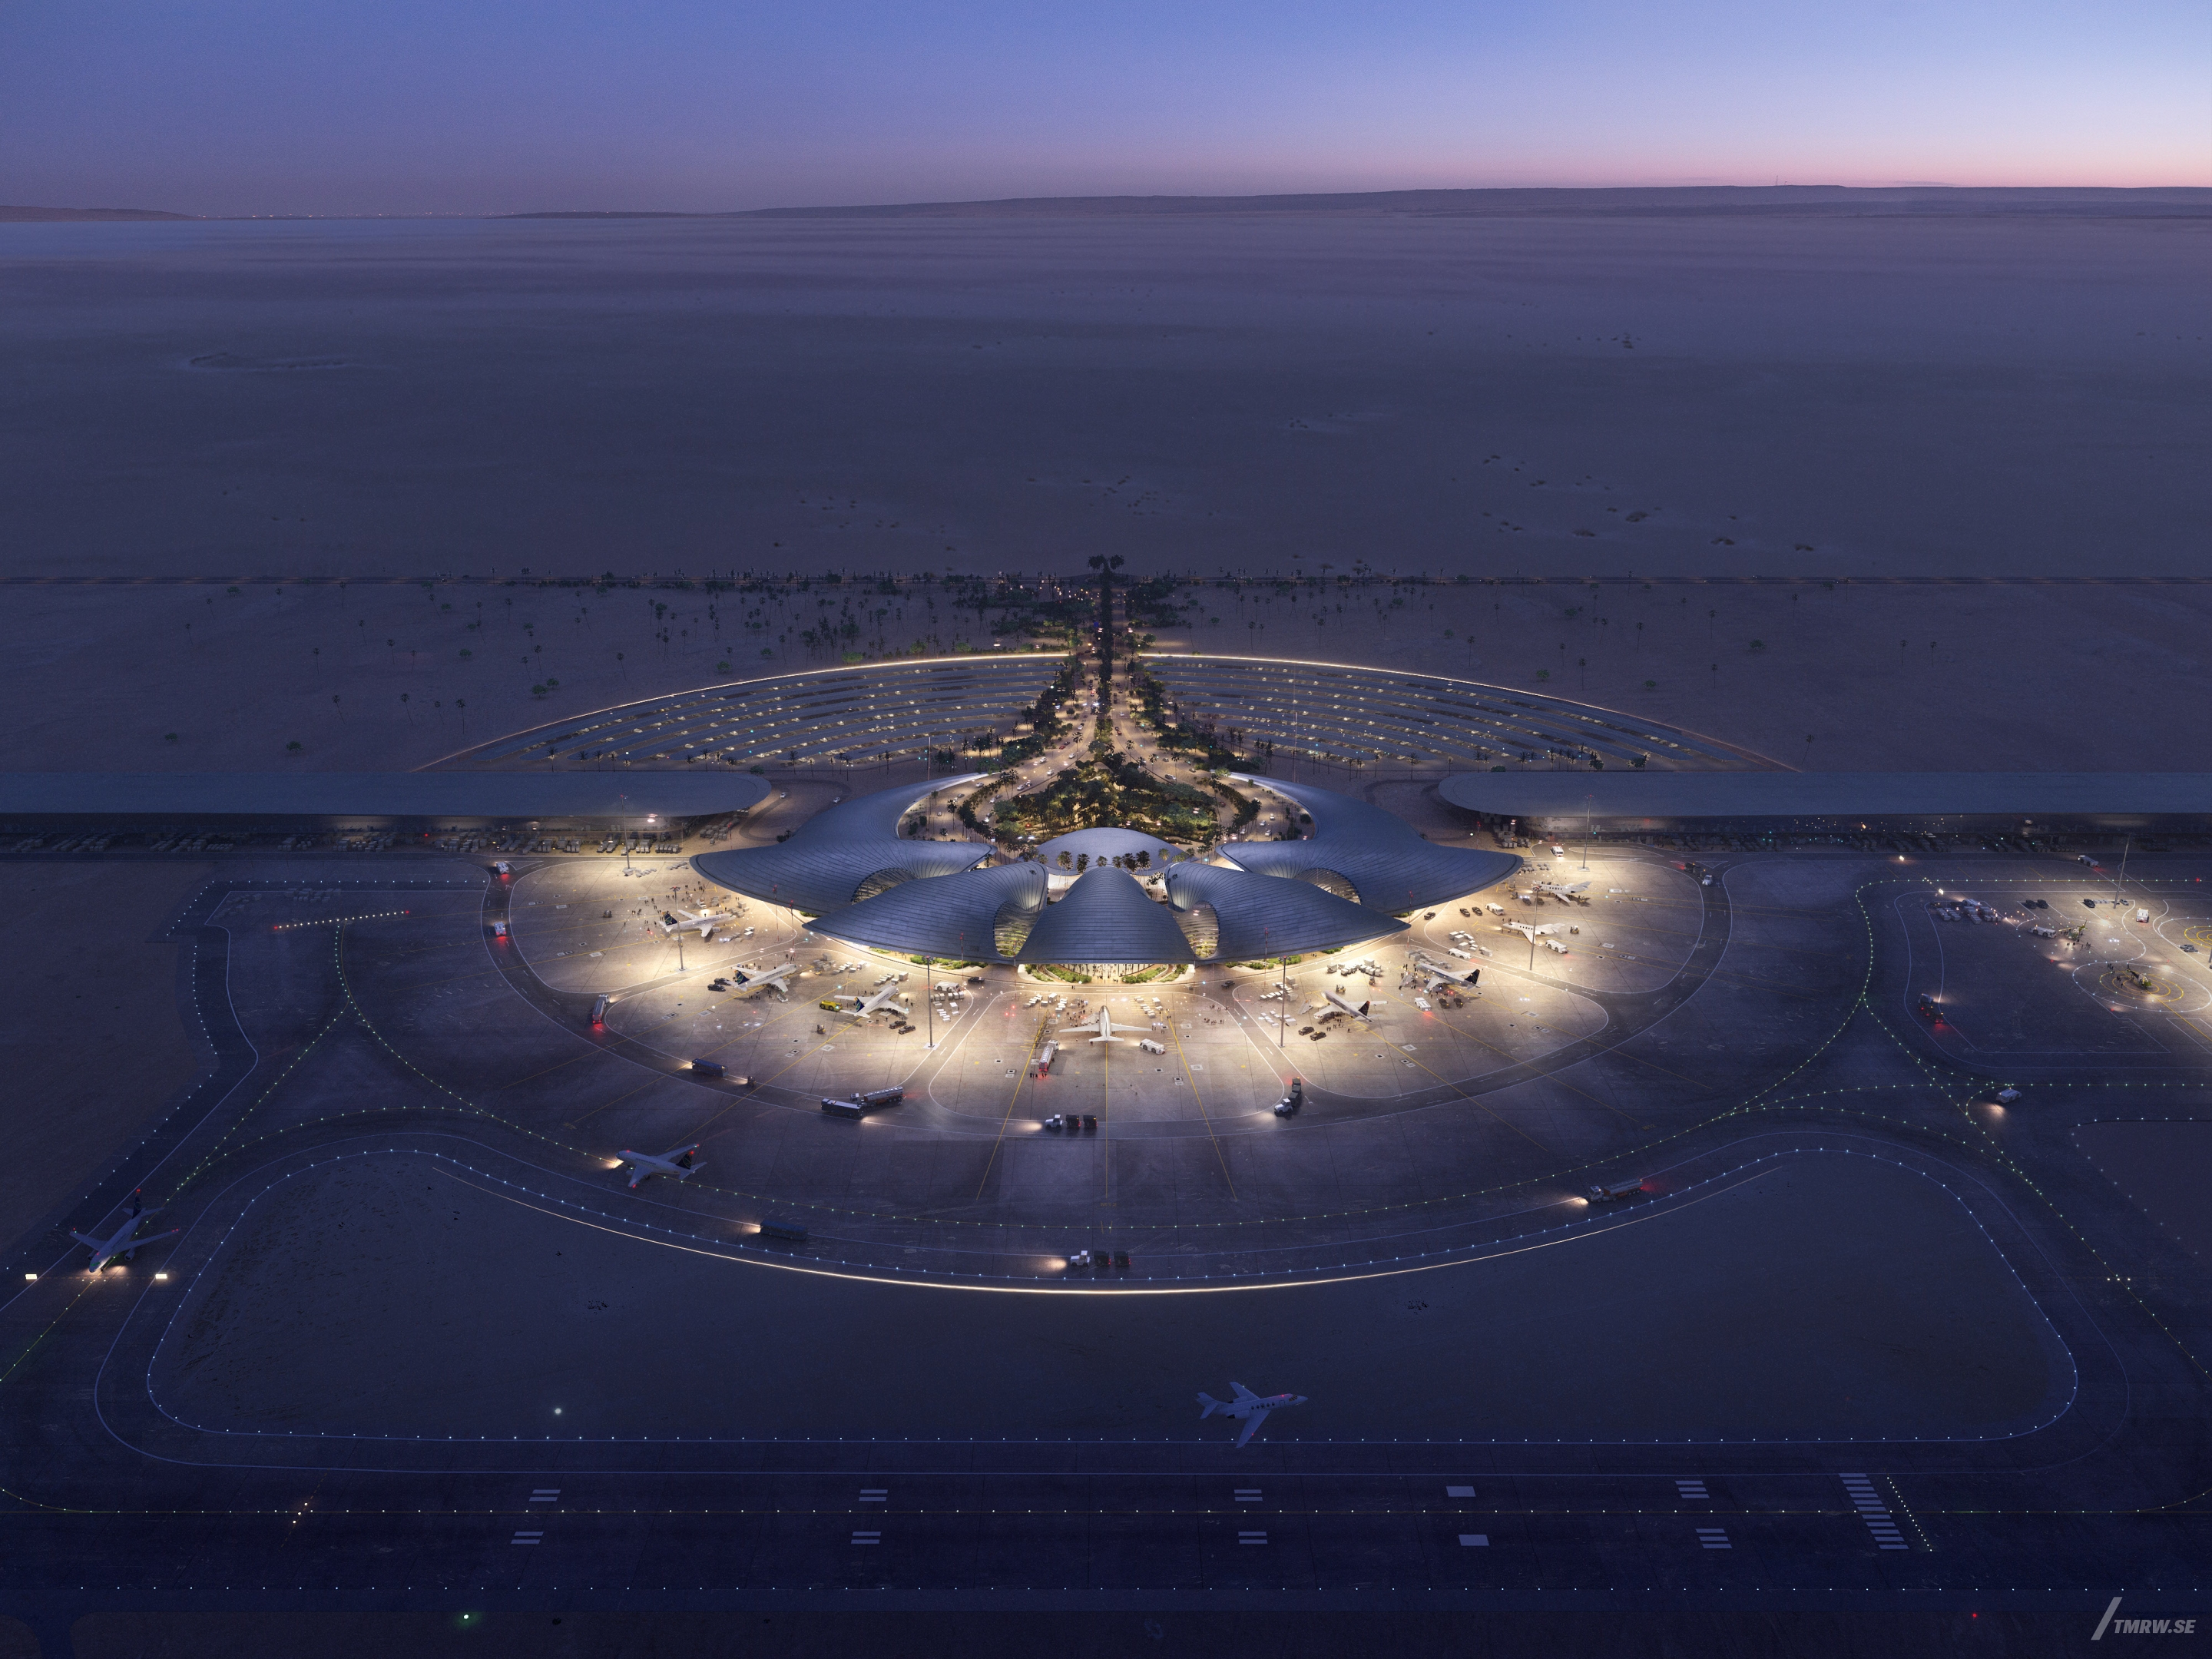 Architectural visualization of Ferring for Foster & Partners. A image of a airport from a aerial view at night in the desert.